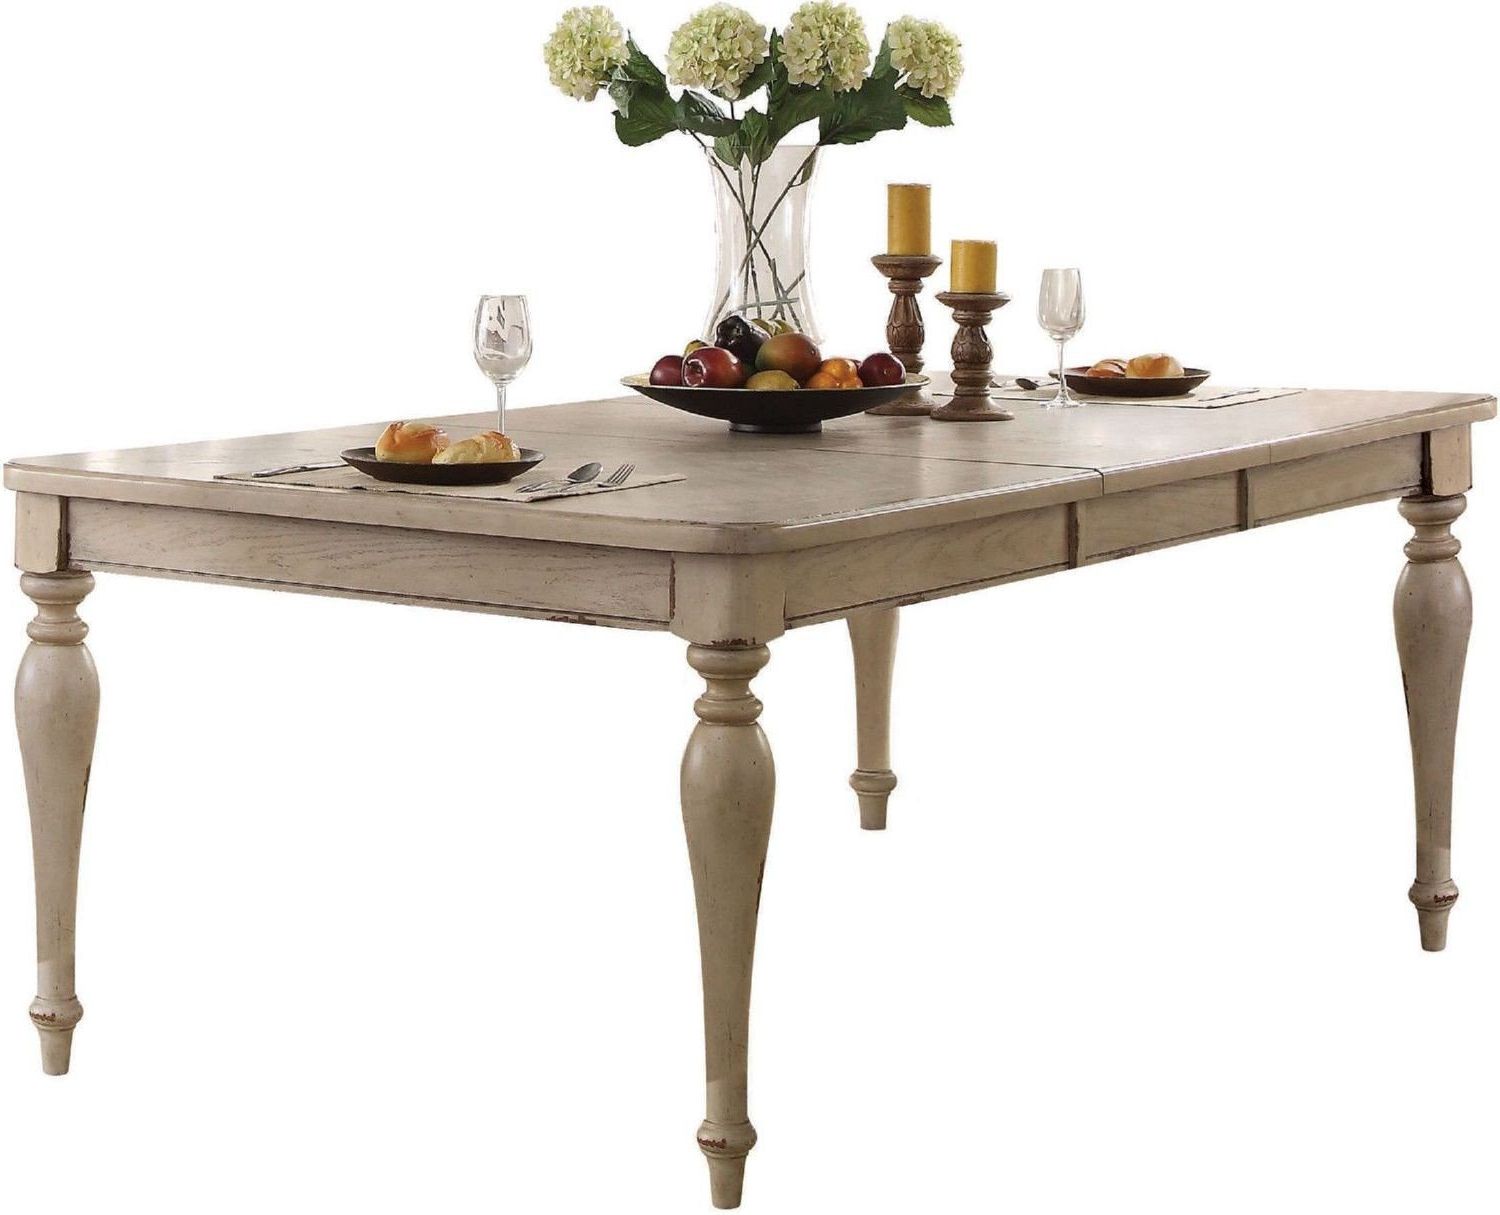 Abelin Antique White Extendable Rectangular Dining Table With Regard To Most Current White Rectangular Dining Tables (View 6 of 20)